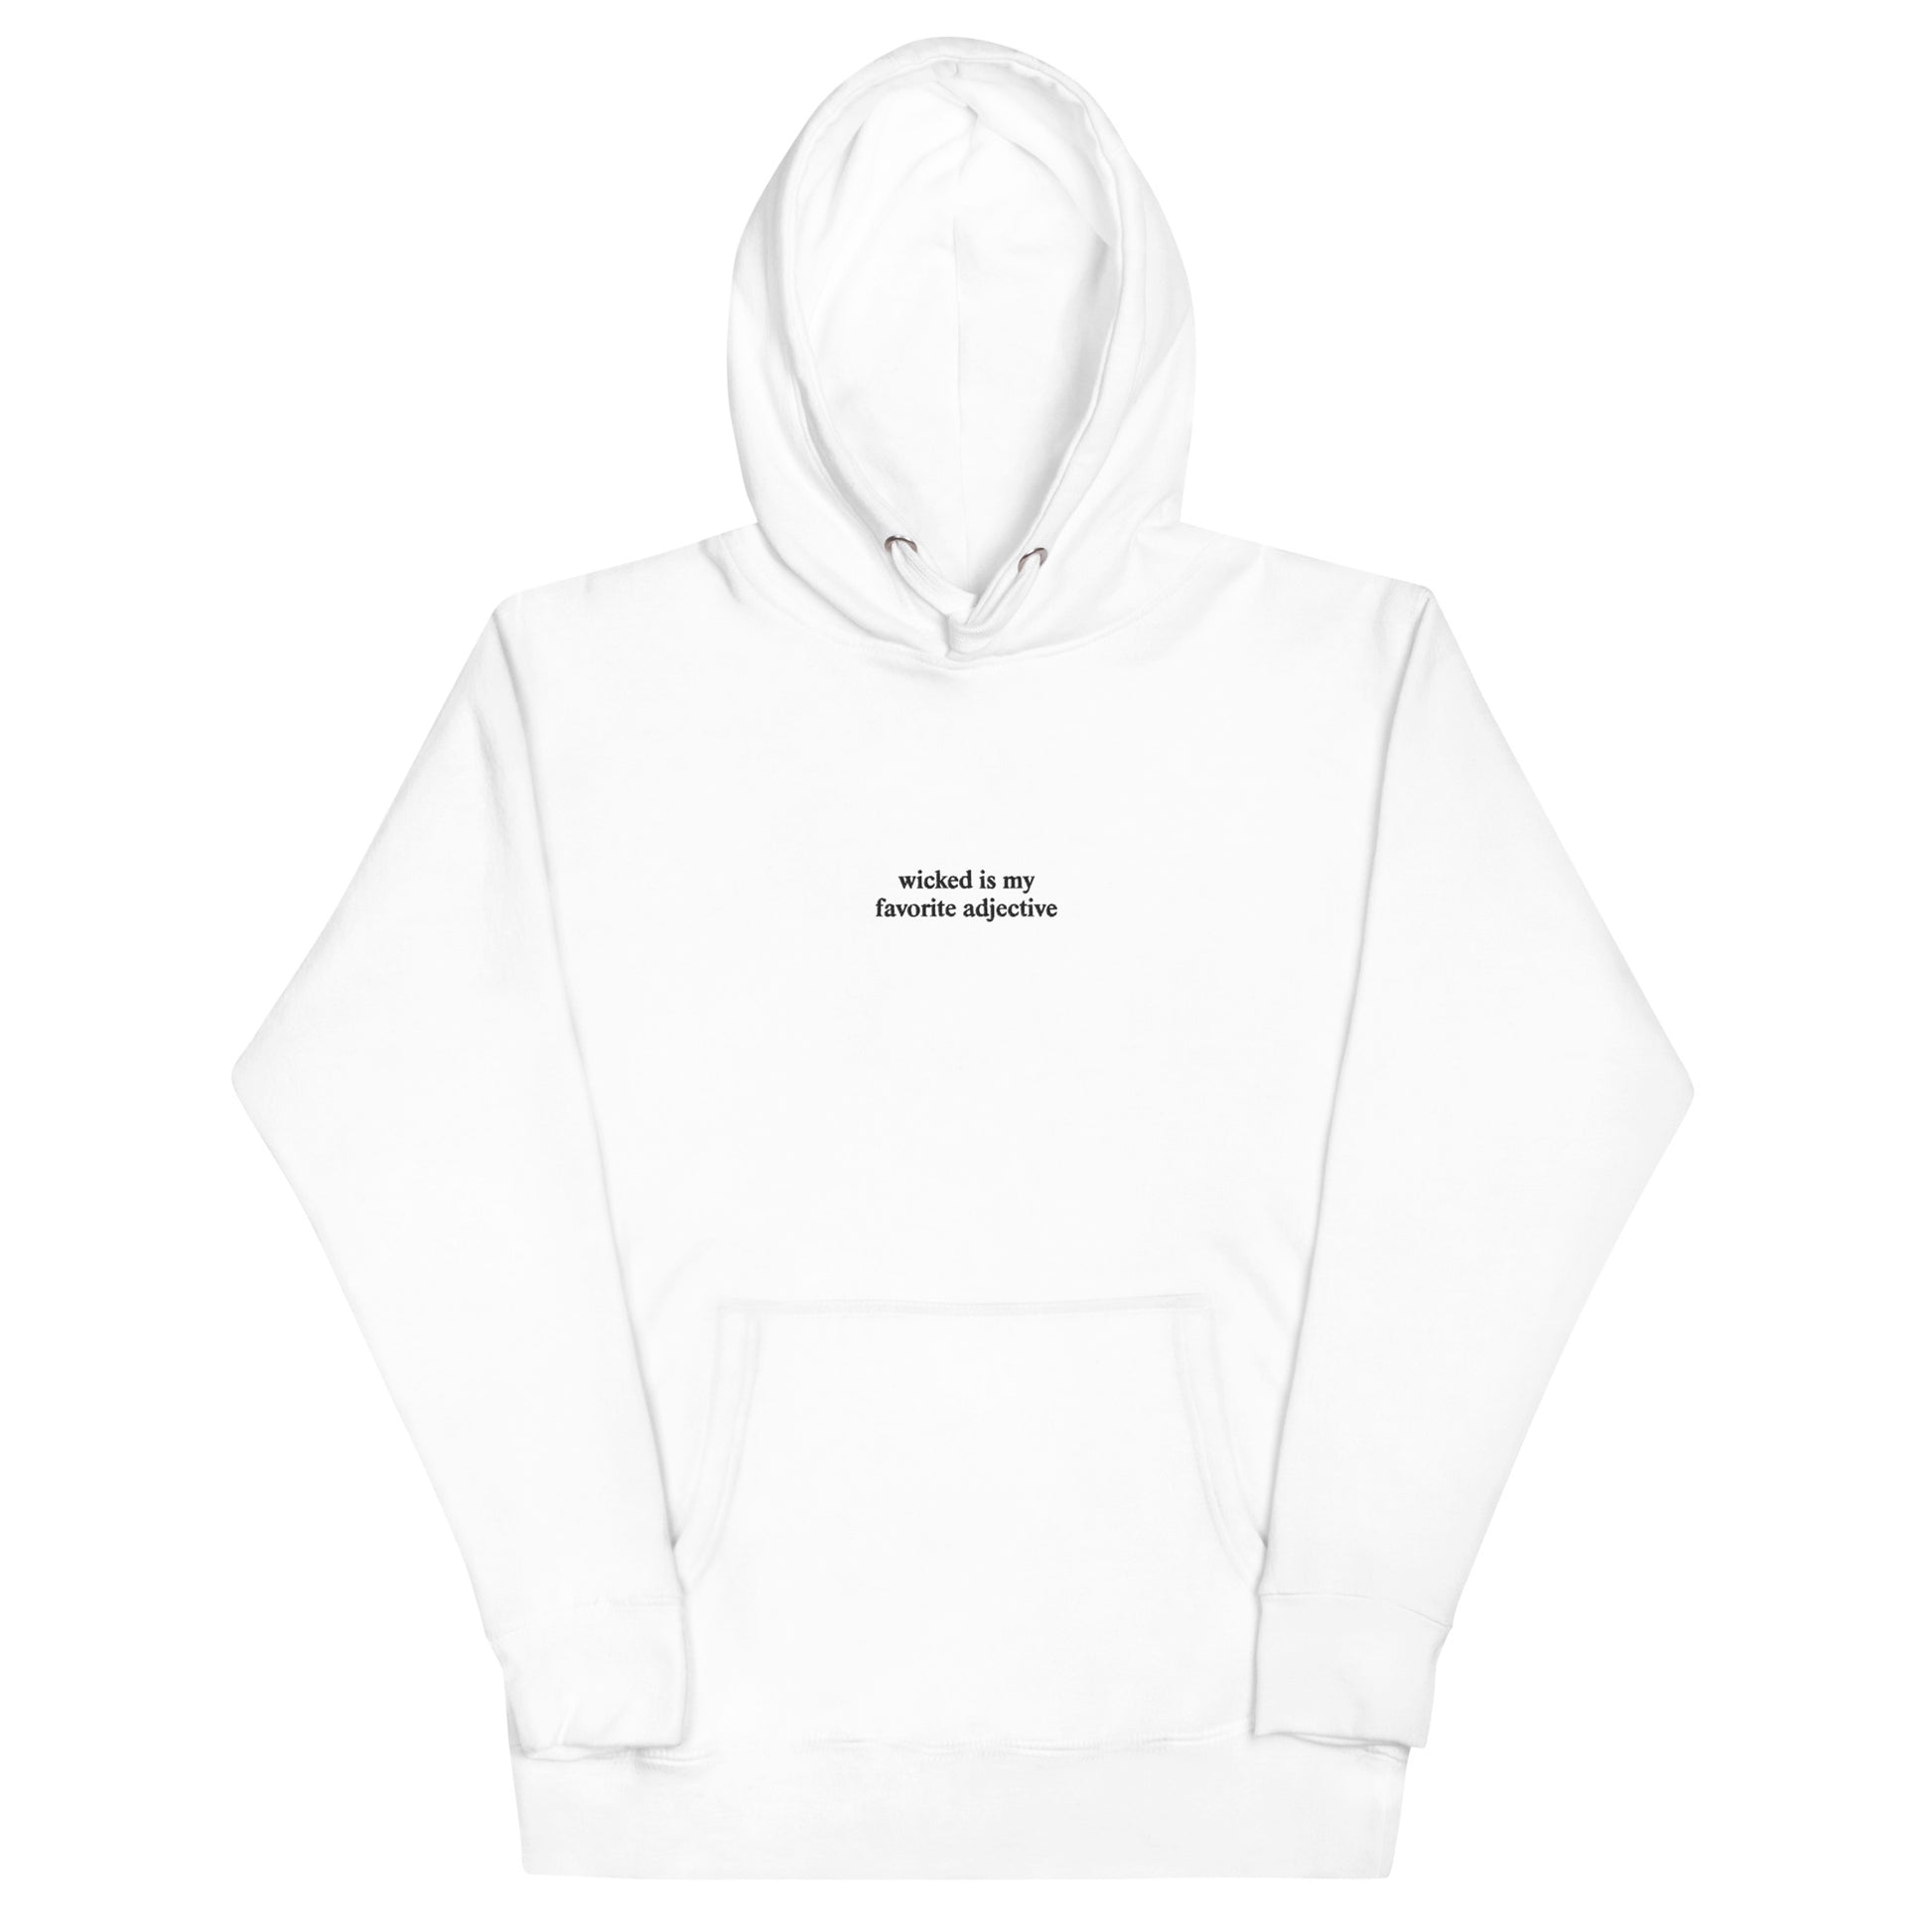 white hoodie that says "wicked is my favorite adjective" in black embroidery